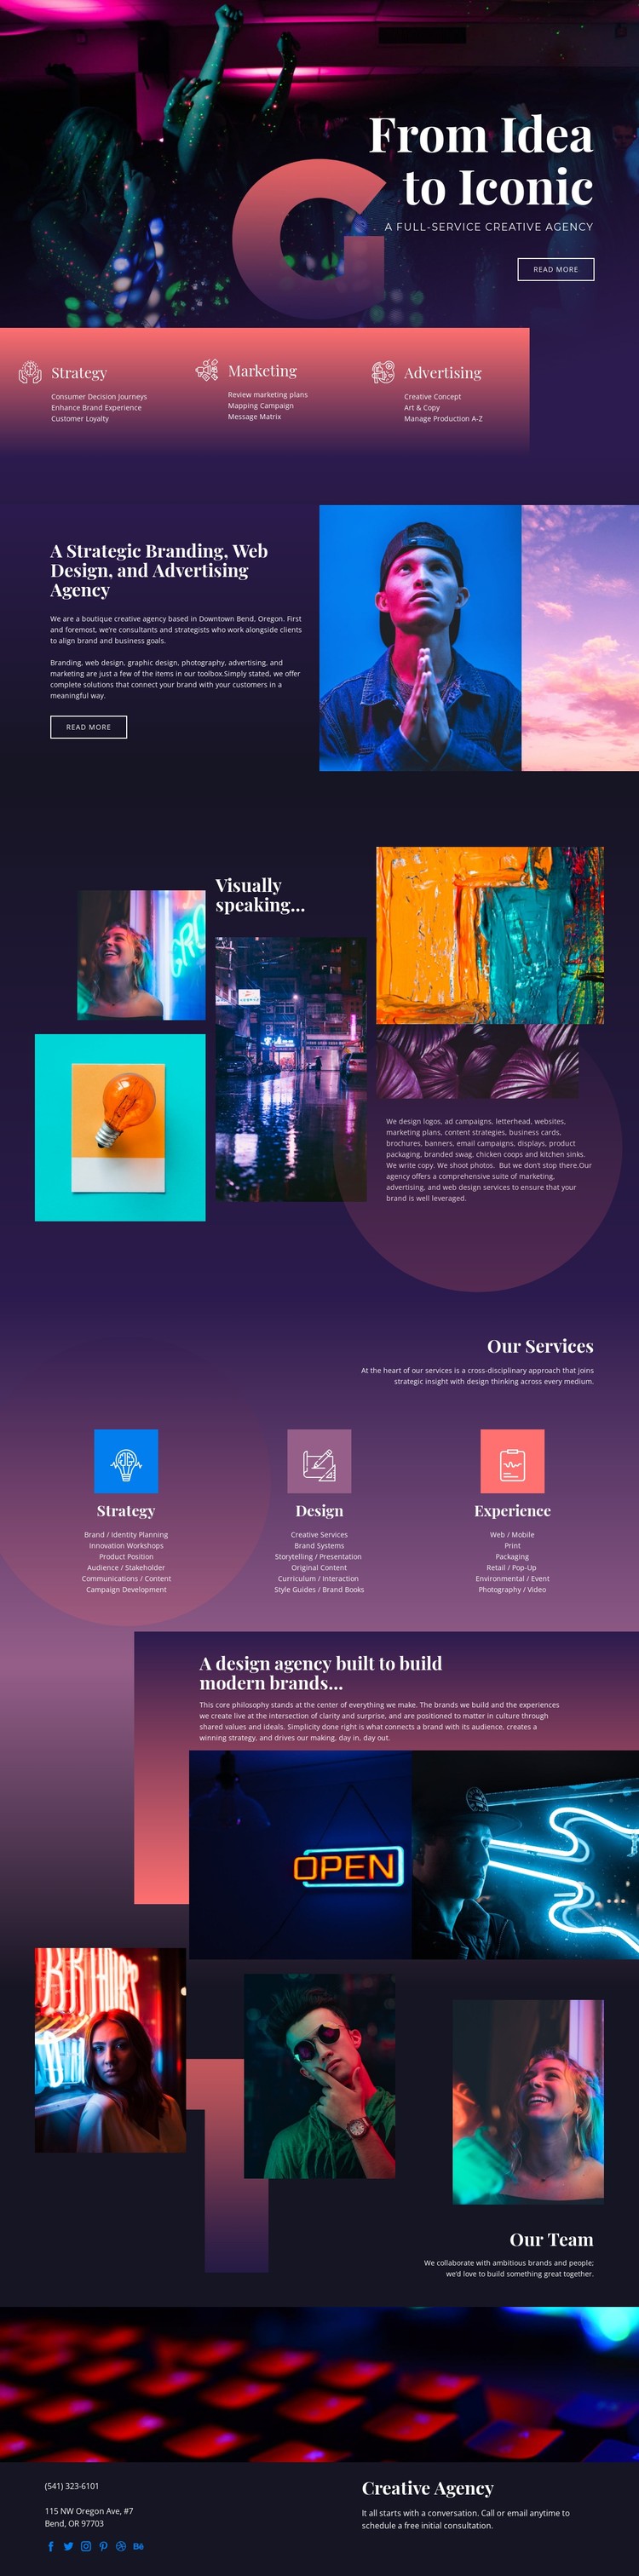 Iconic ideas of art CSS Template